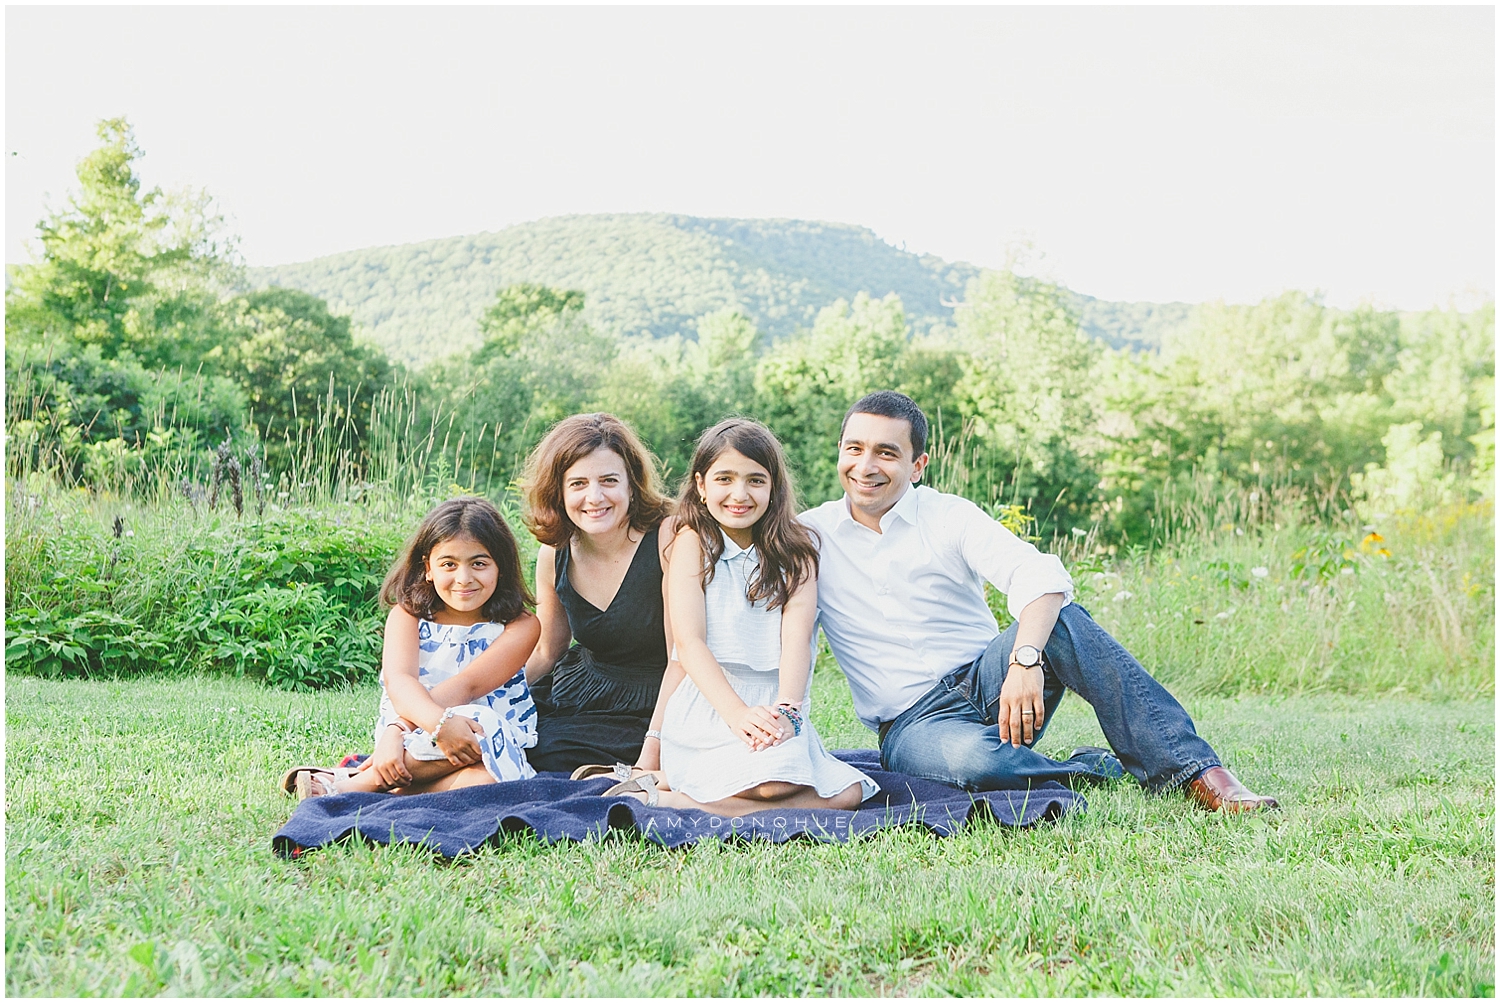 Family Portraits | Strafford, Vermont | Amy Donohue Photography